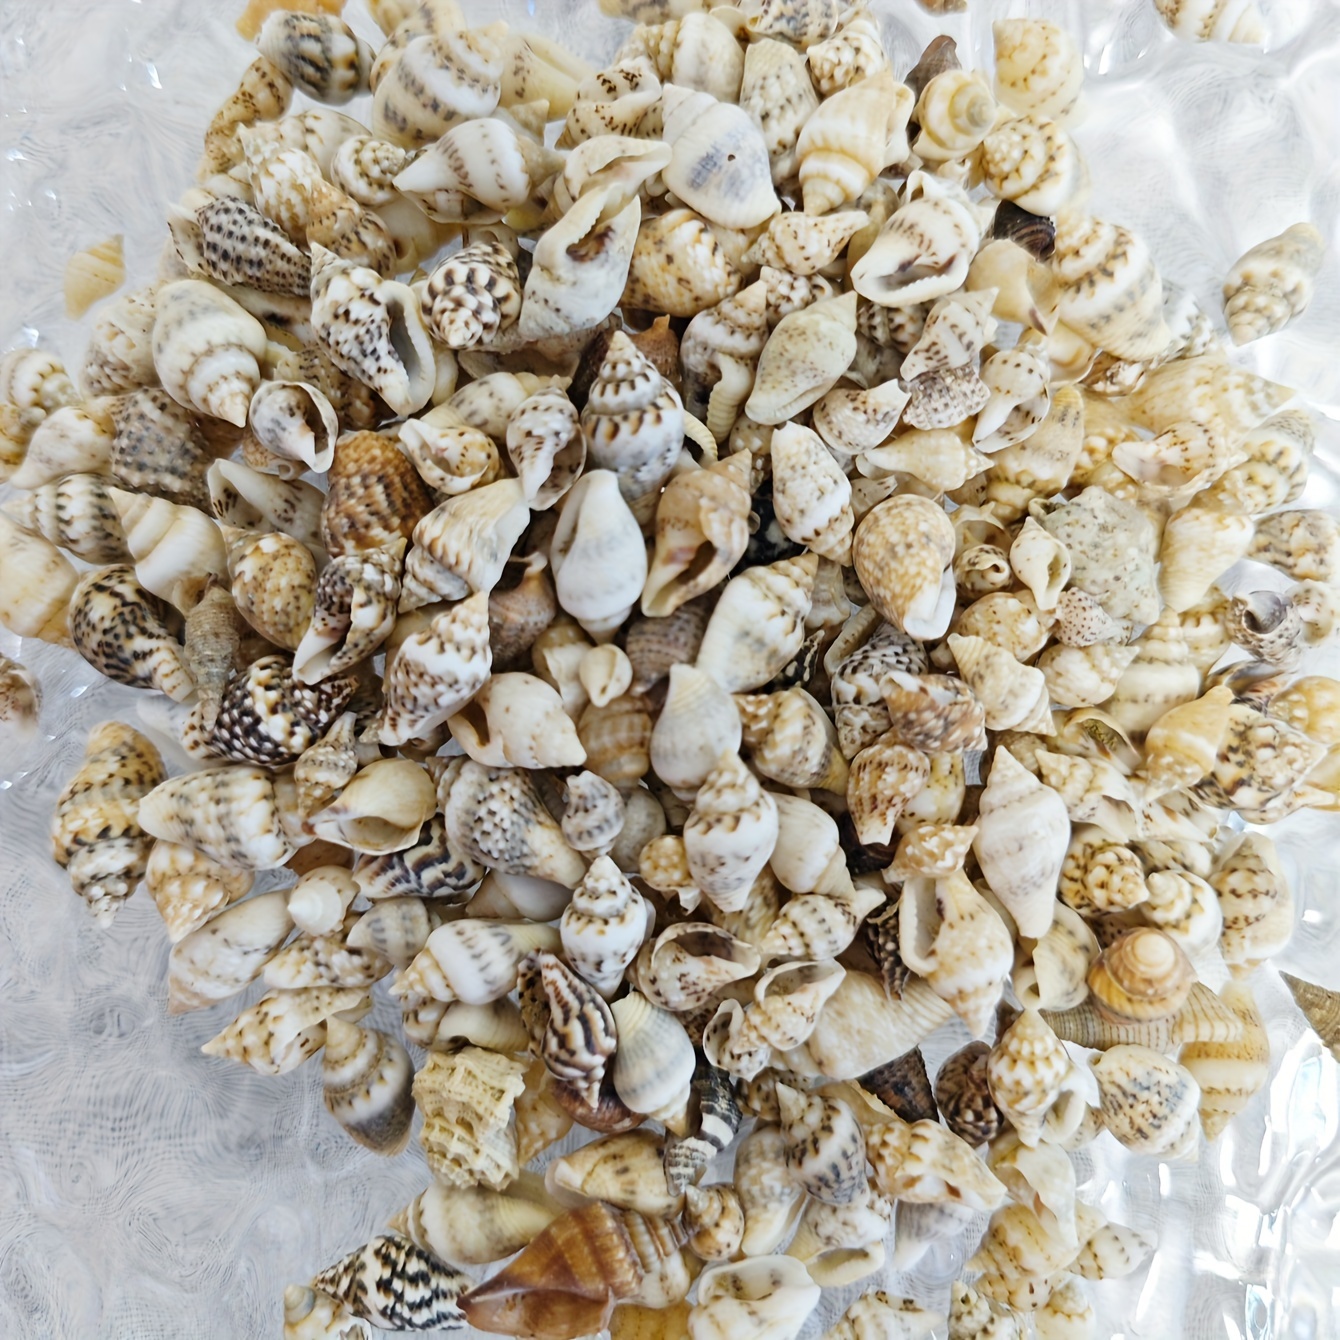 

50g Mini Natural Shell Beads For Jewelry Making, Assorted Tiny Sea Shells For Aquarium Terrarium Decor, Diy Wind Chime Scrapbook Ornaments, Mediterranean Style Craft Materials - No Power Needed